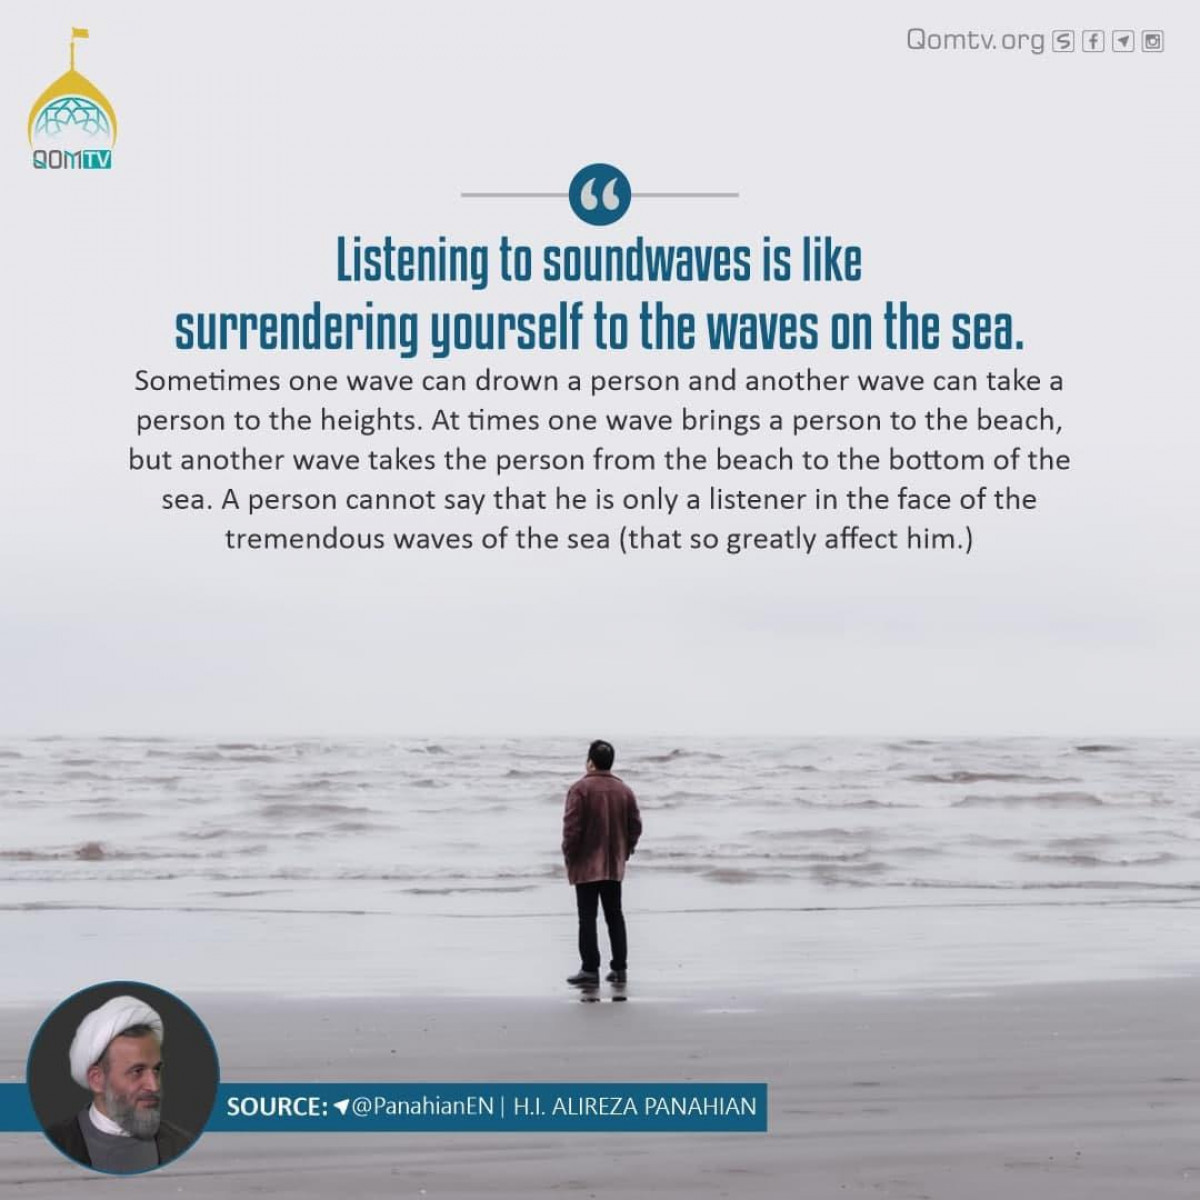 Listening to soundwaves is like surrendering yourself to the waves on the sea